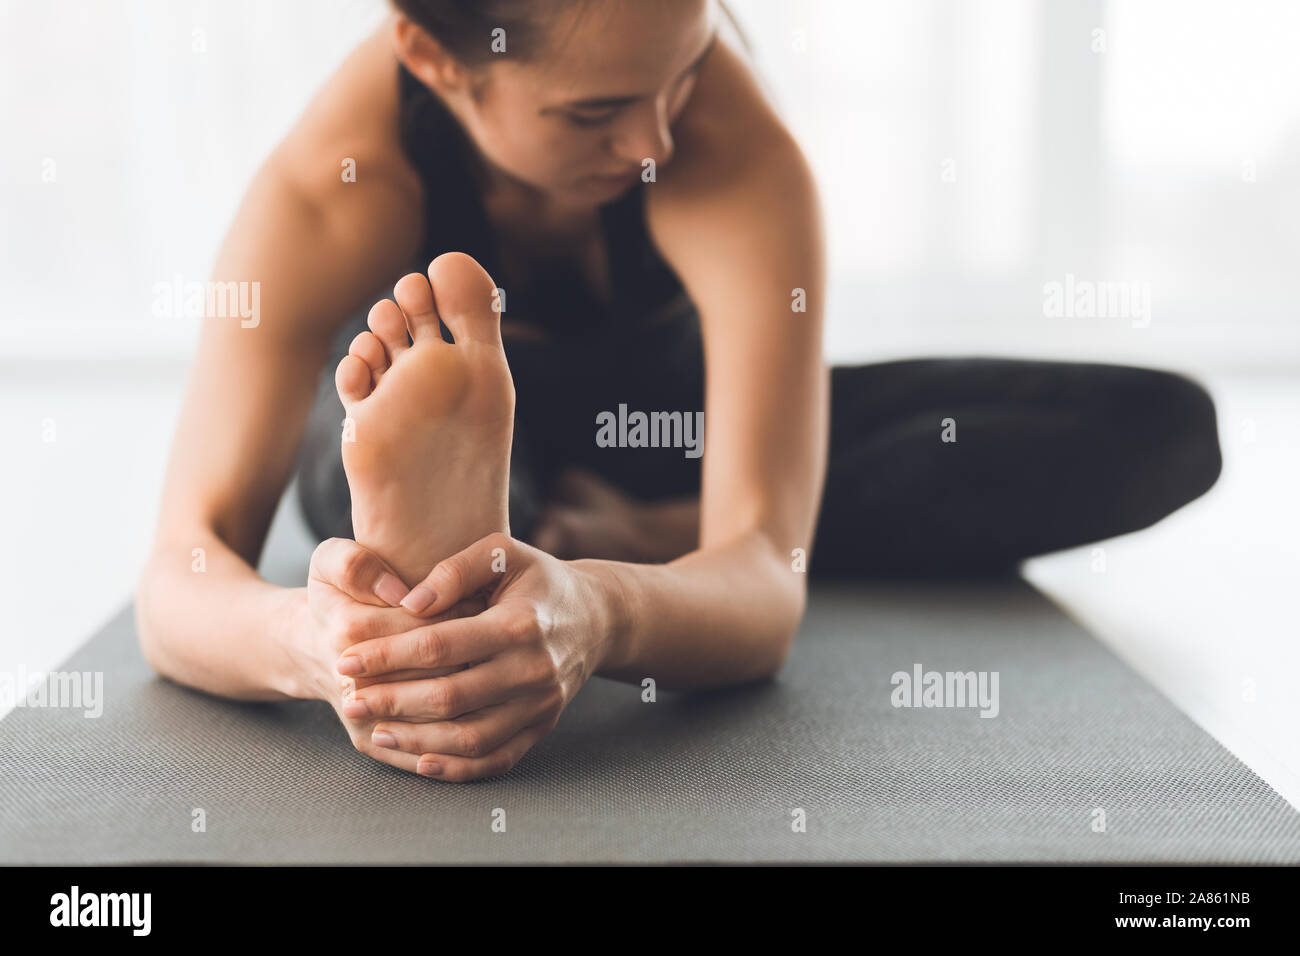 Fit woman warmup stretching, training indoors, focus on foot Stock Photo